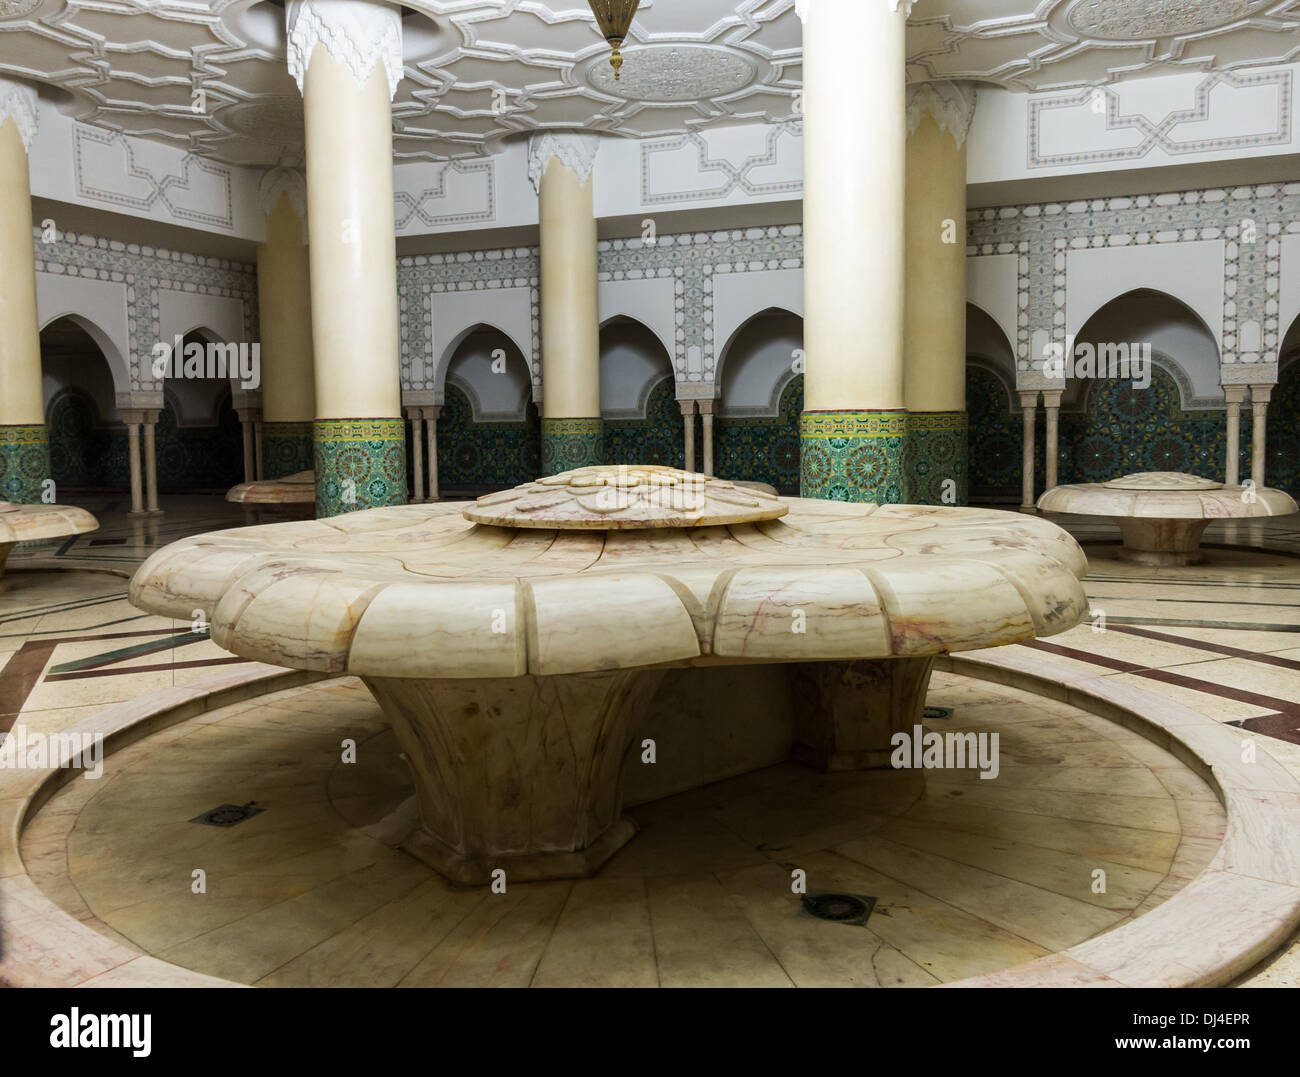 Interior of the Hassan II Mosque or Grande Mosquee Hassan II in Casablanca, the largest mosque in Morocco Stock Photo